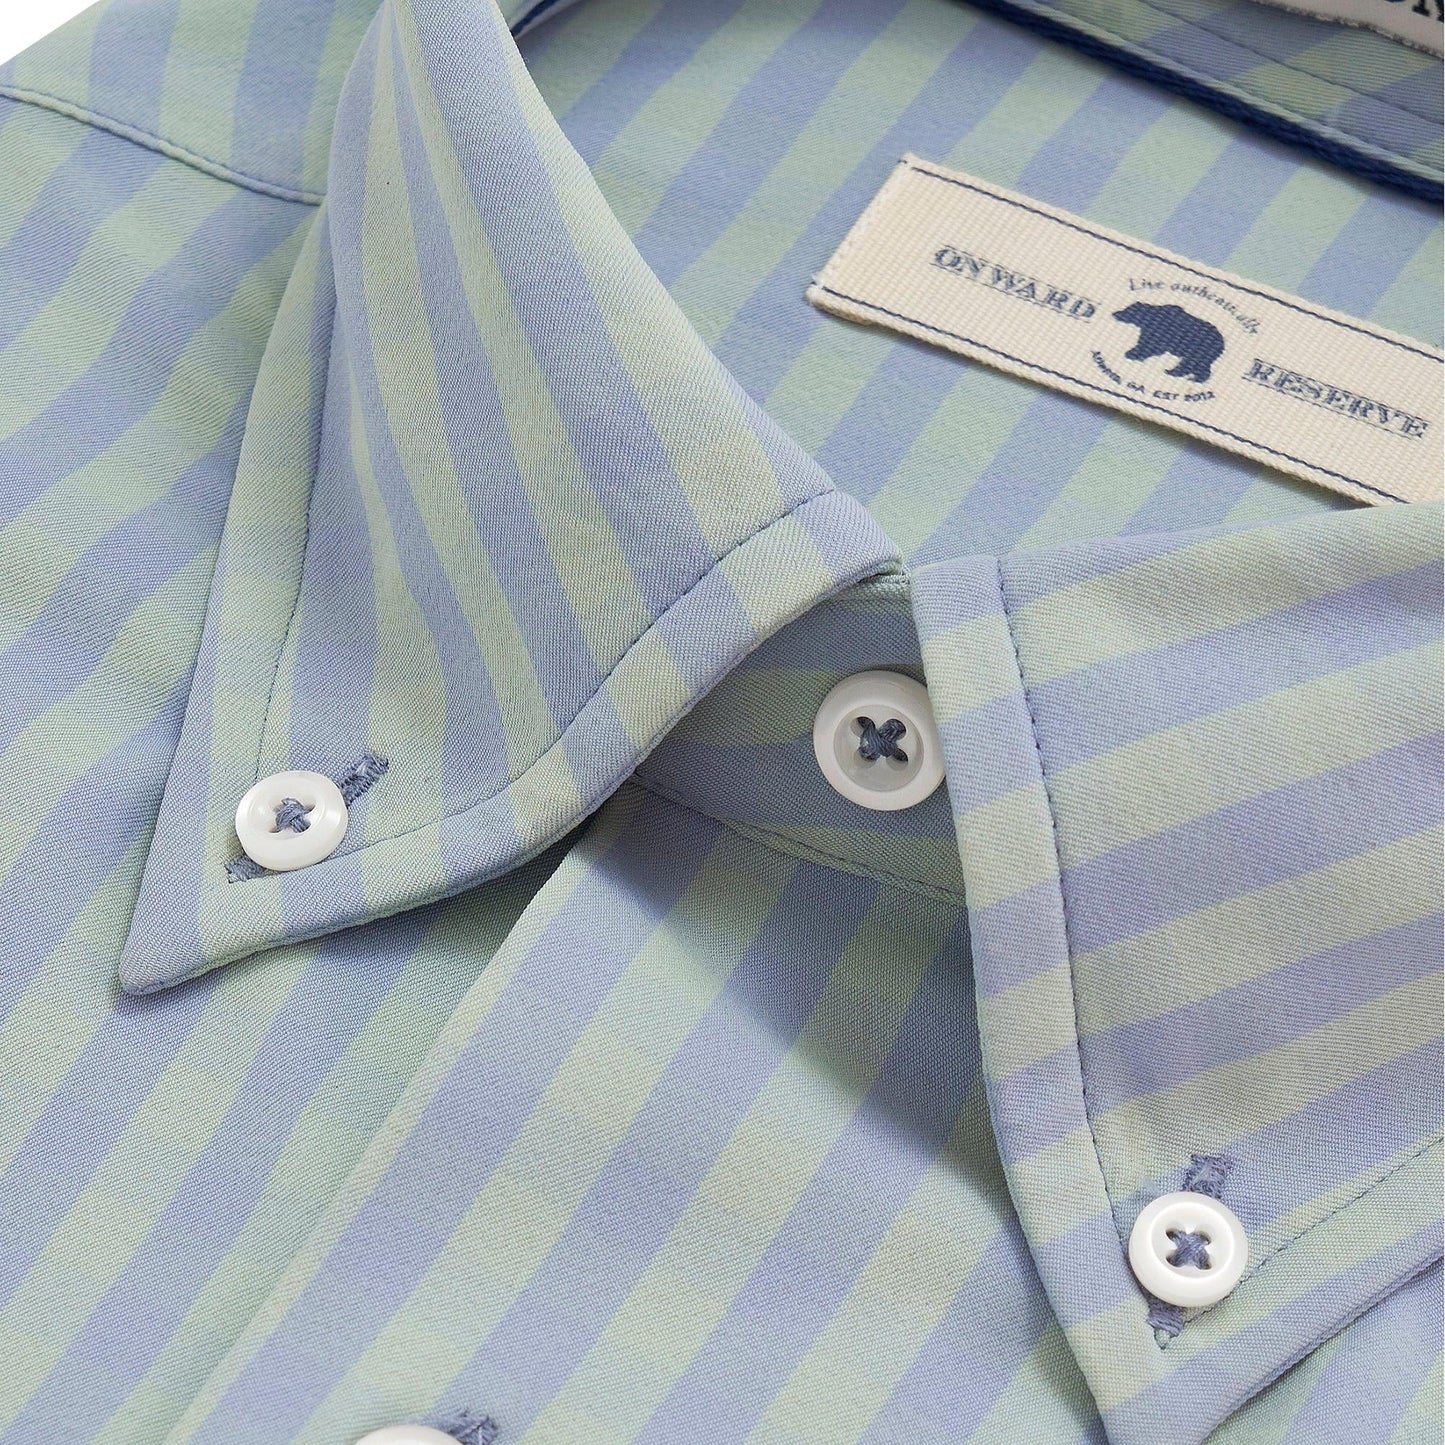 Sopchoppy Tailored Fit Performance Button Down - Onward Reserve